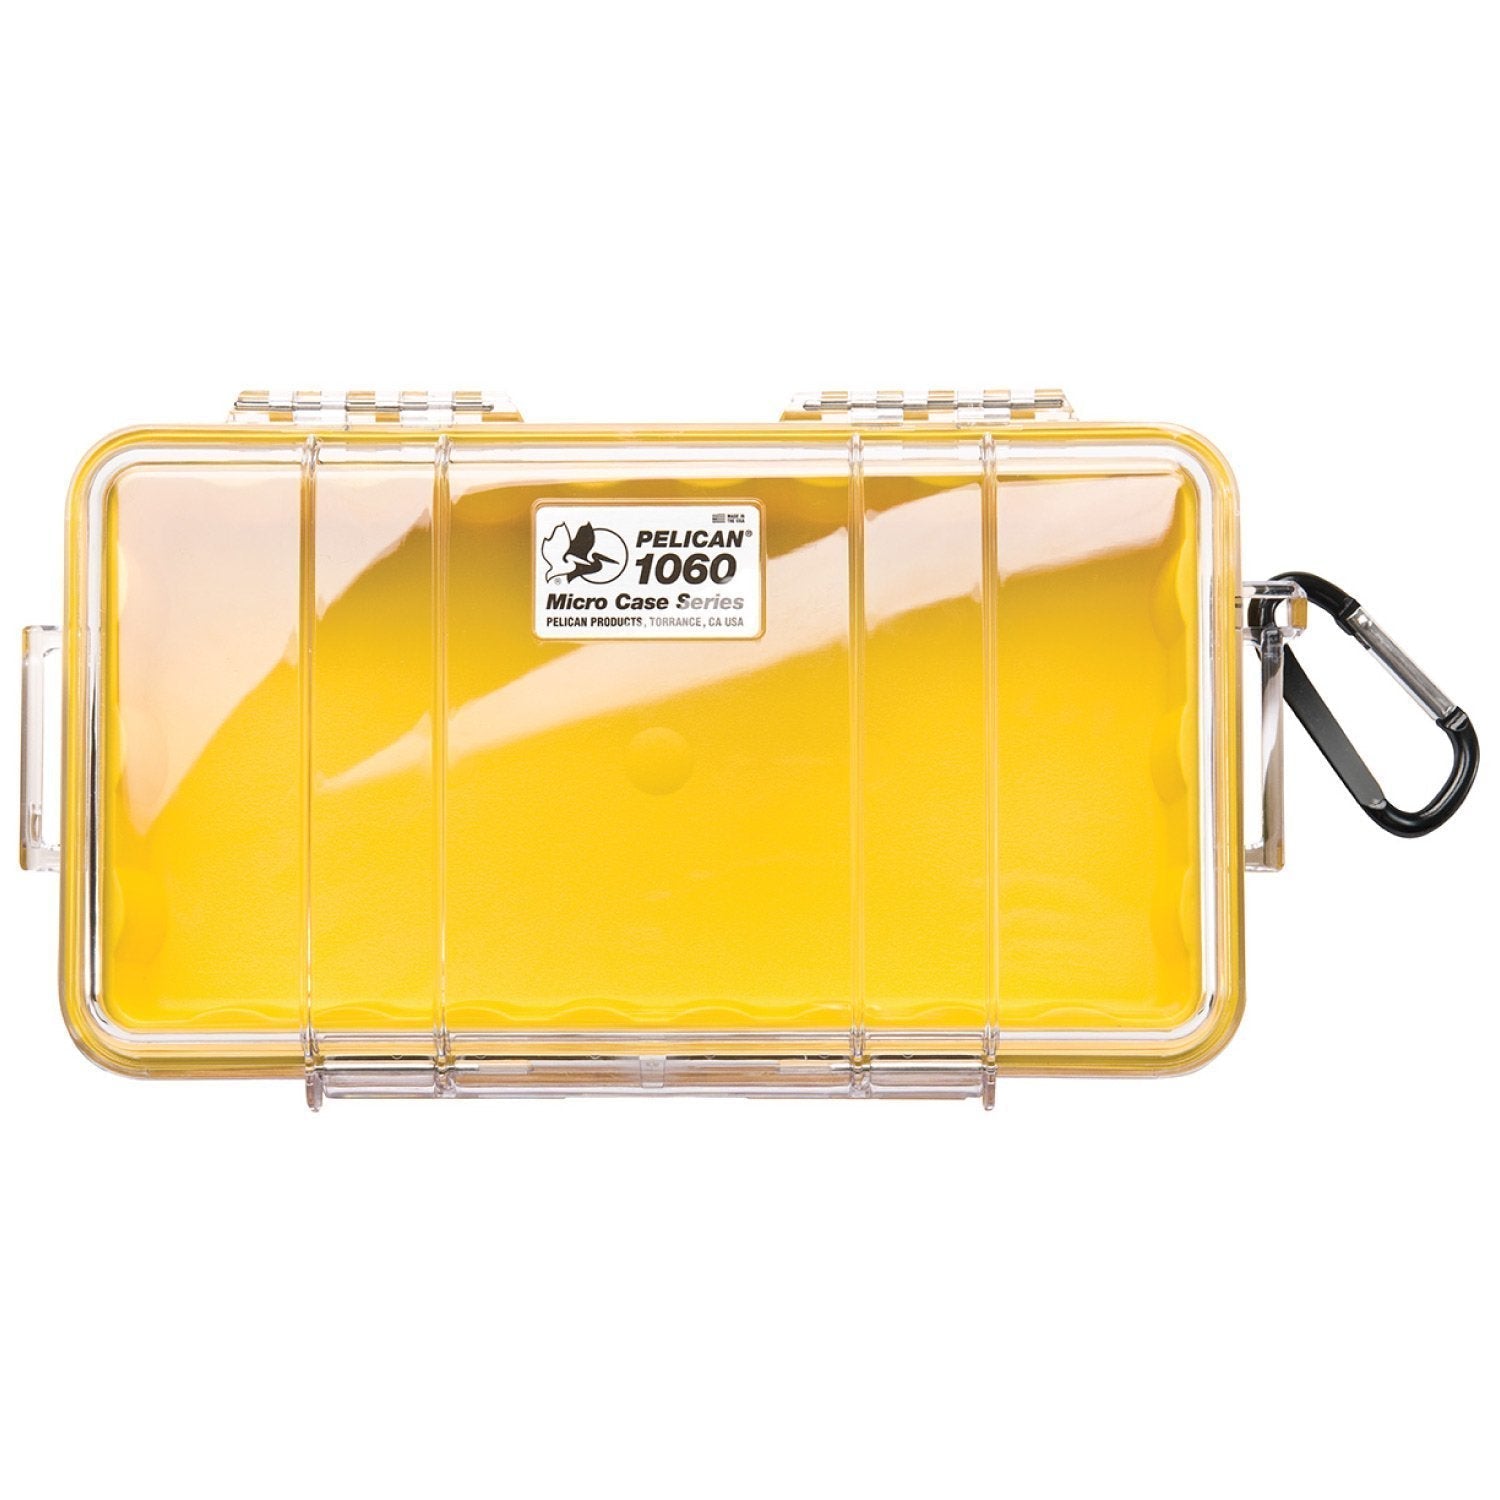 Pelican 1060 Micro Case Cases Pelican Products Clear Shell with Yellow Liner Tactical Gear Supplier Tactical Distributors Australia